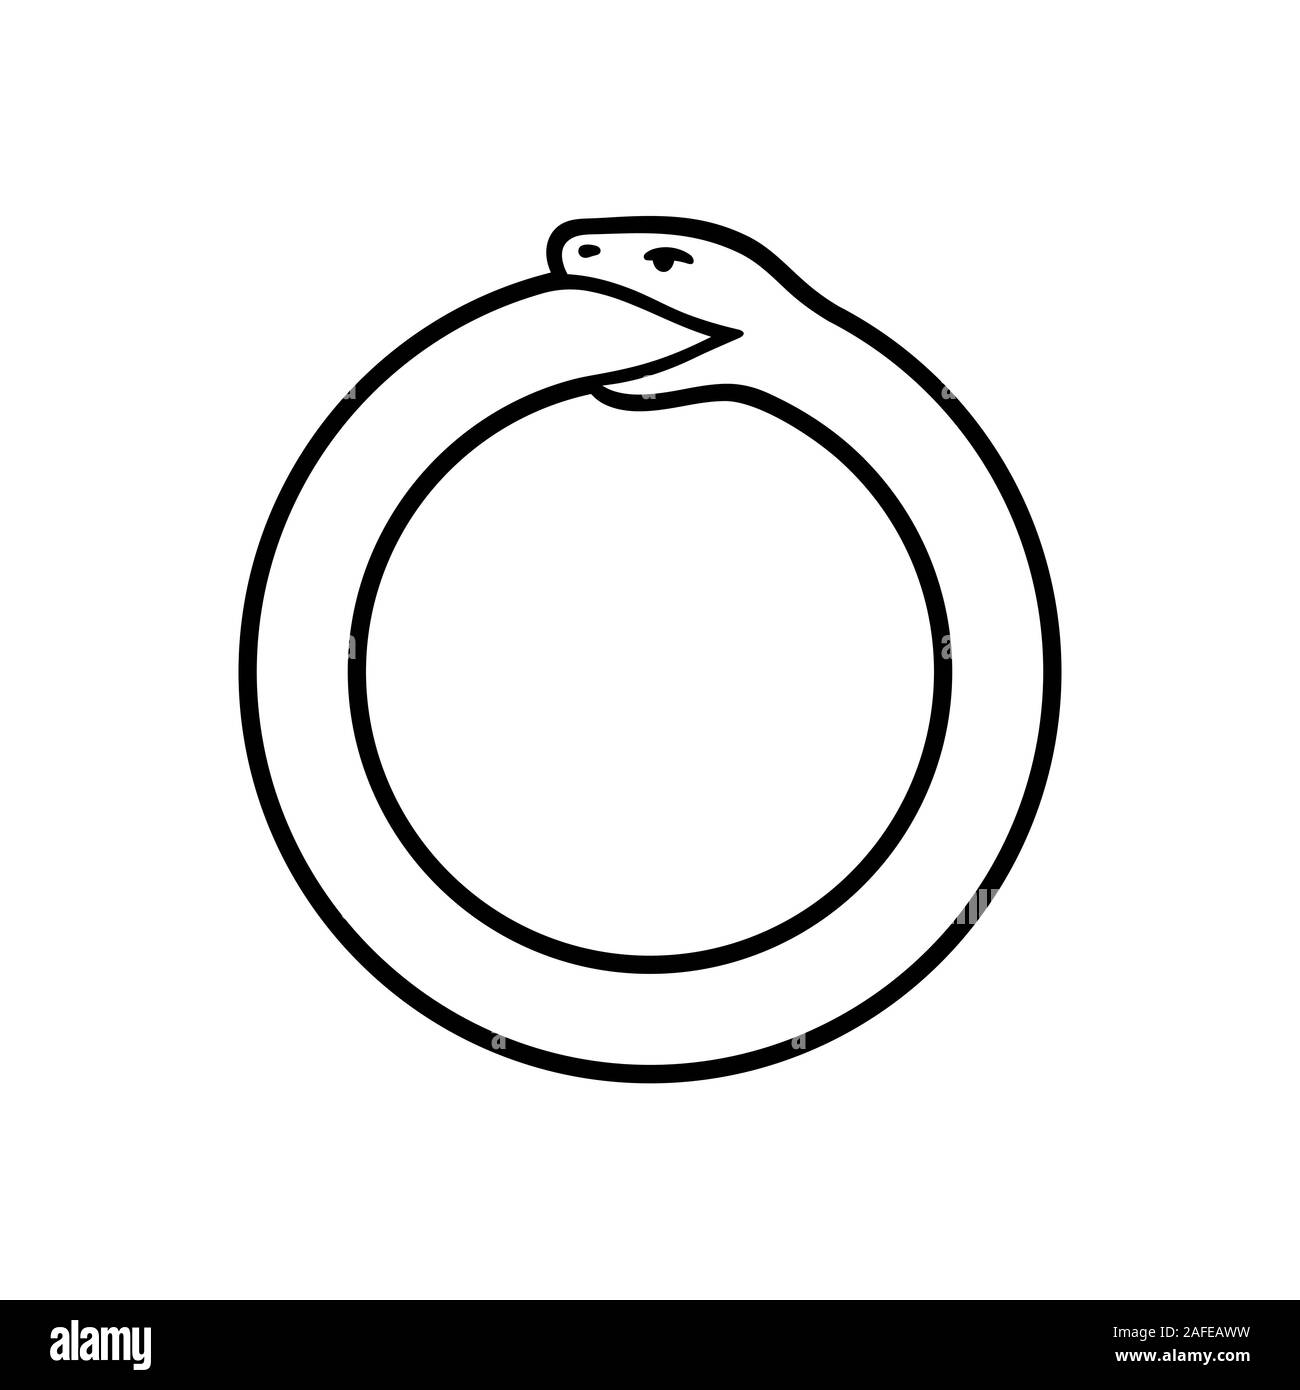 Ouroboros symbol, snake eating its own tail. Simple black and white drawing. Modern circle logo, vector illustration. Stock Vector